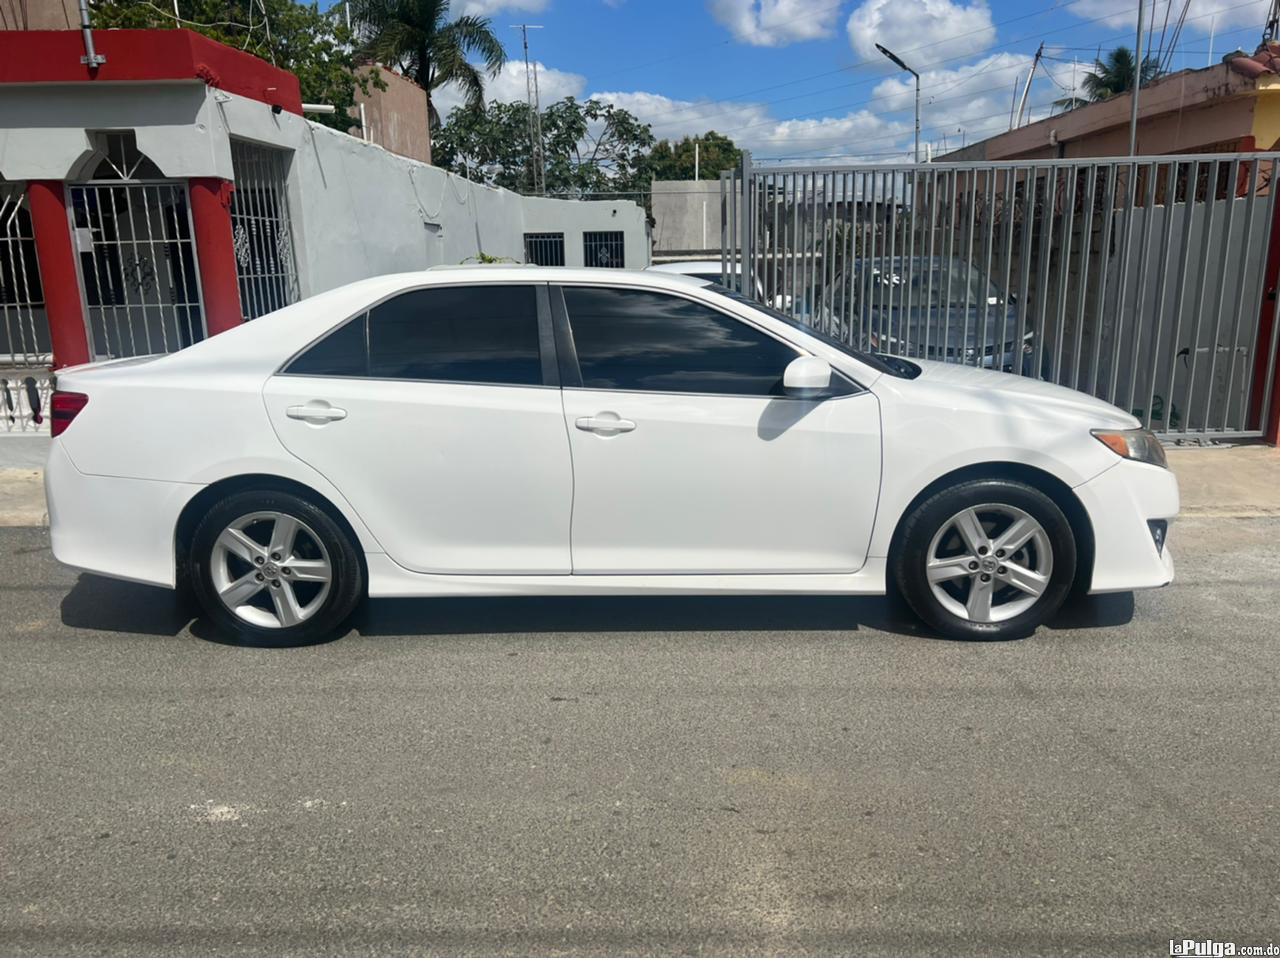 Toyota Camry Se  2014 inicial 269 mil Foto 7138856-2.jpg